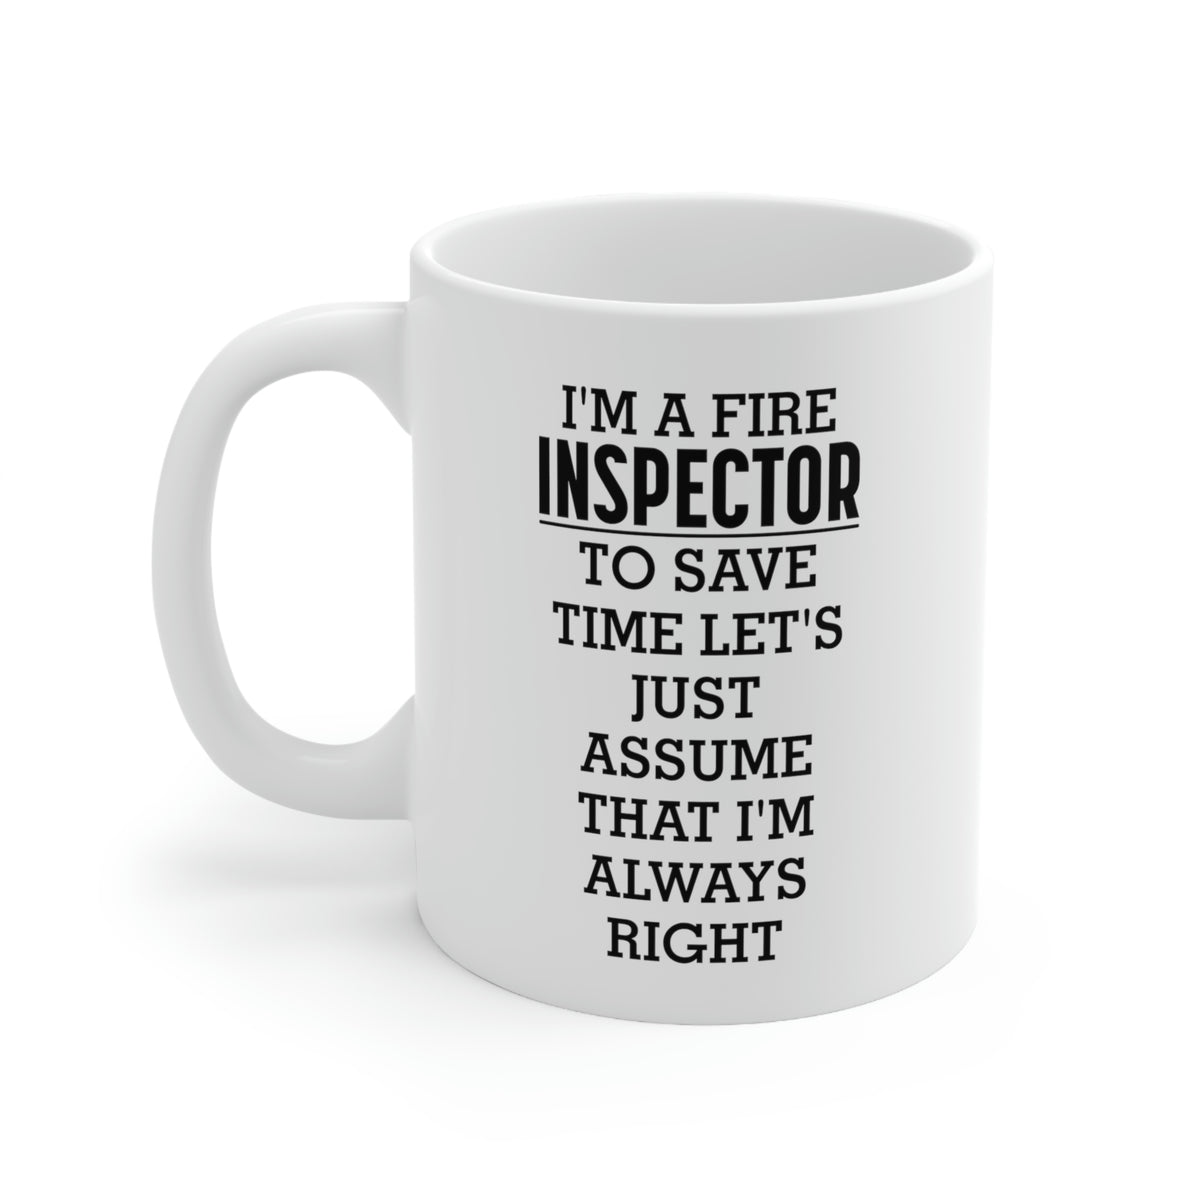 Fire Inspector Gifts - I’m A Fire Inspector. To Save Time Let’s Just Assume That I’m Always Right White Coffee Mug, Tea Cup